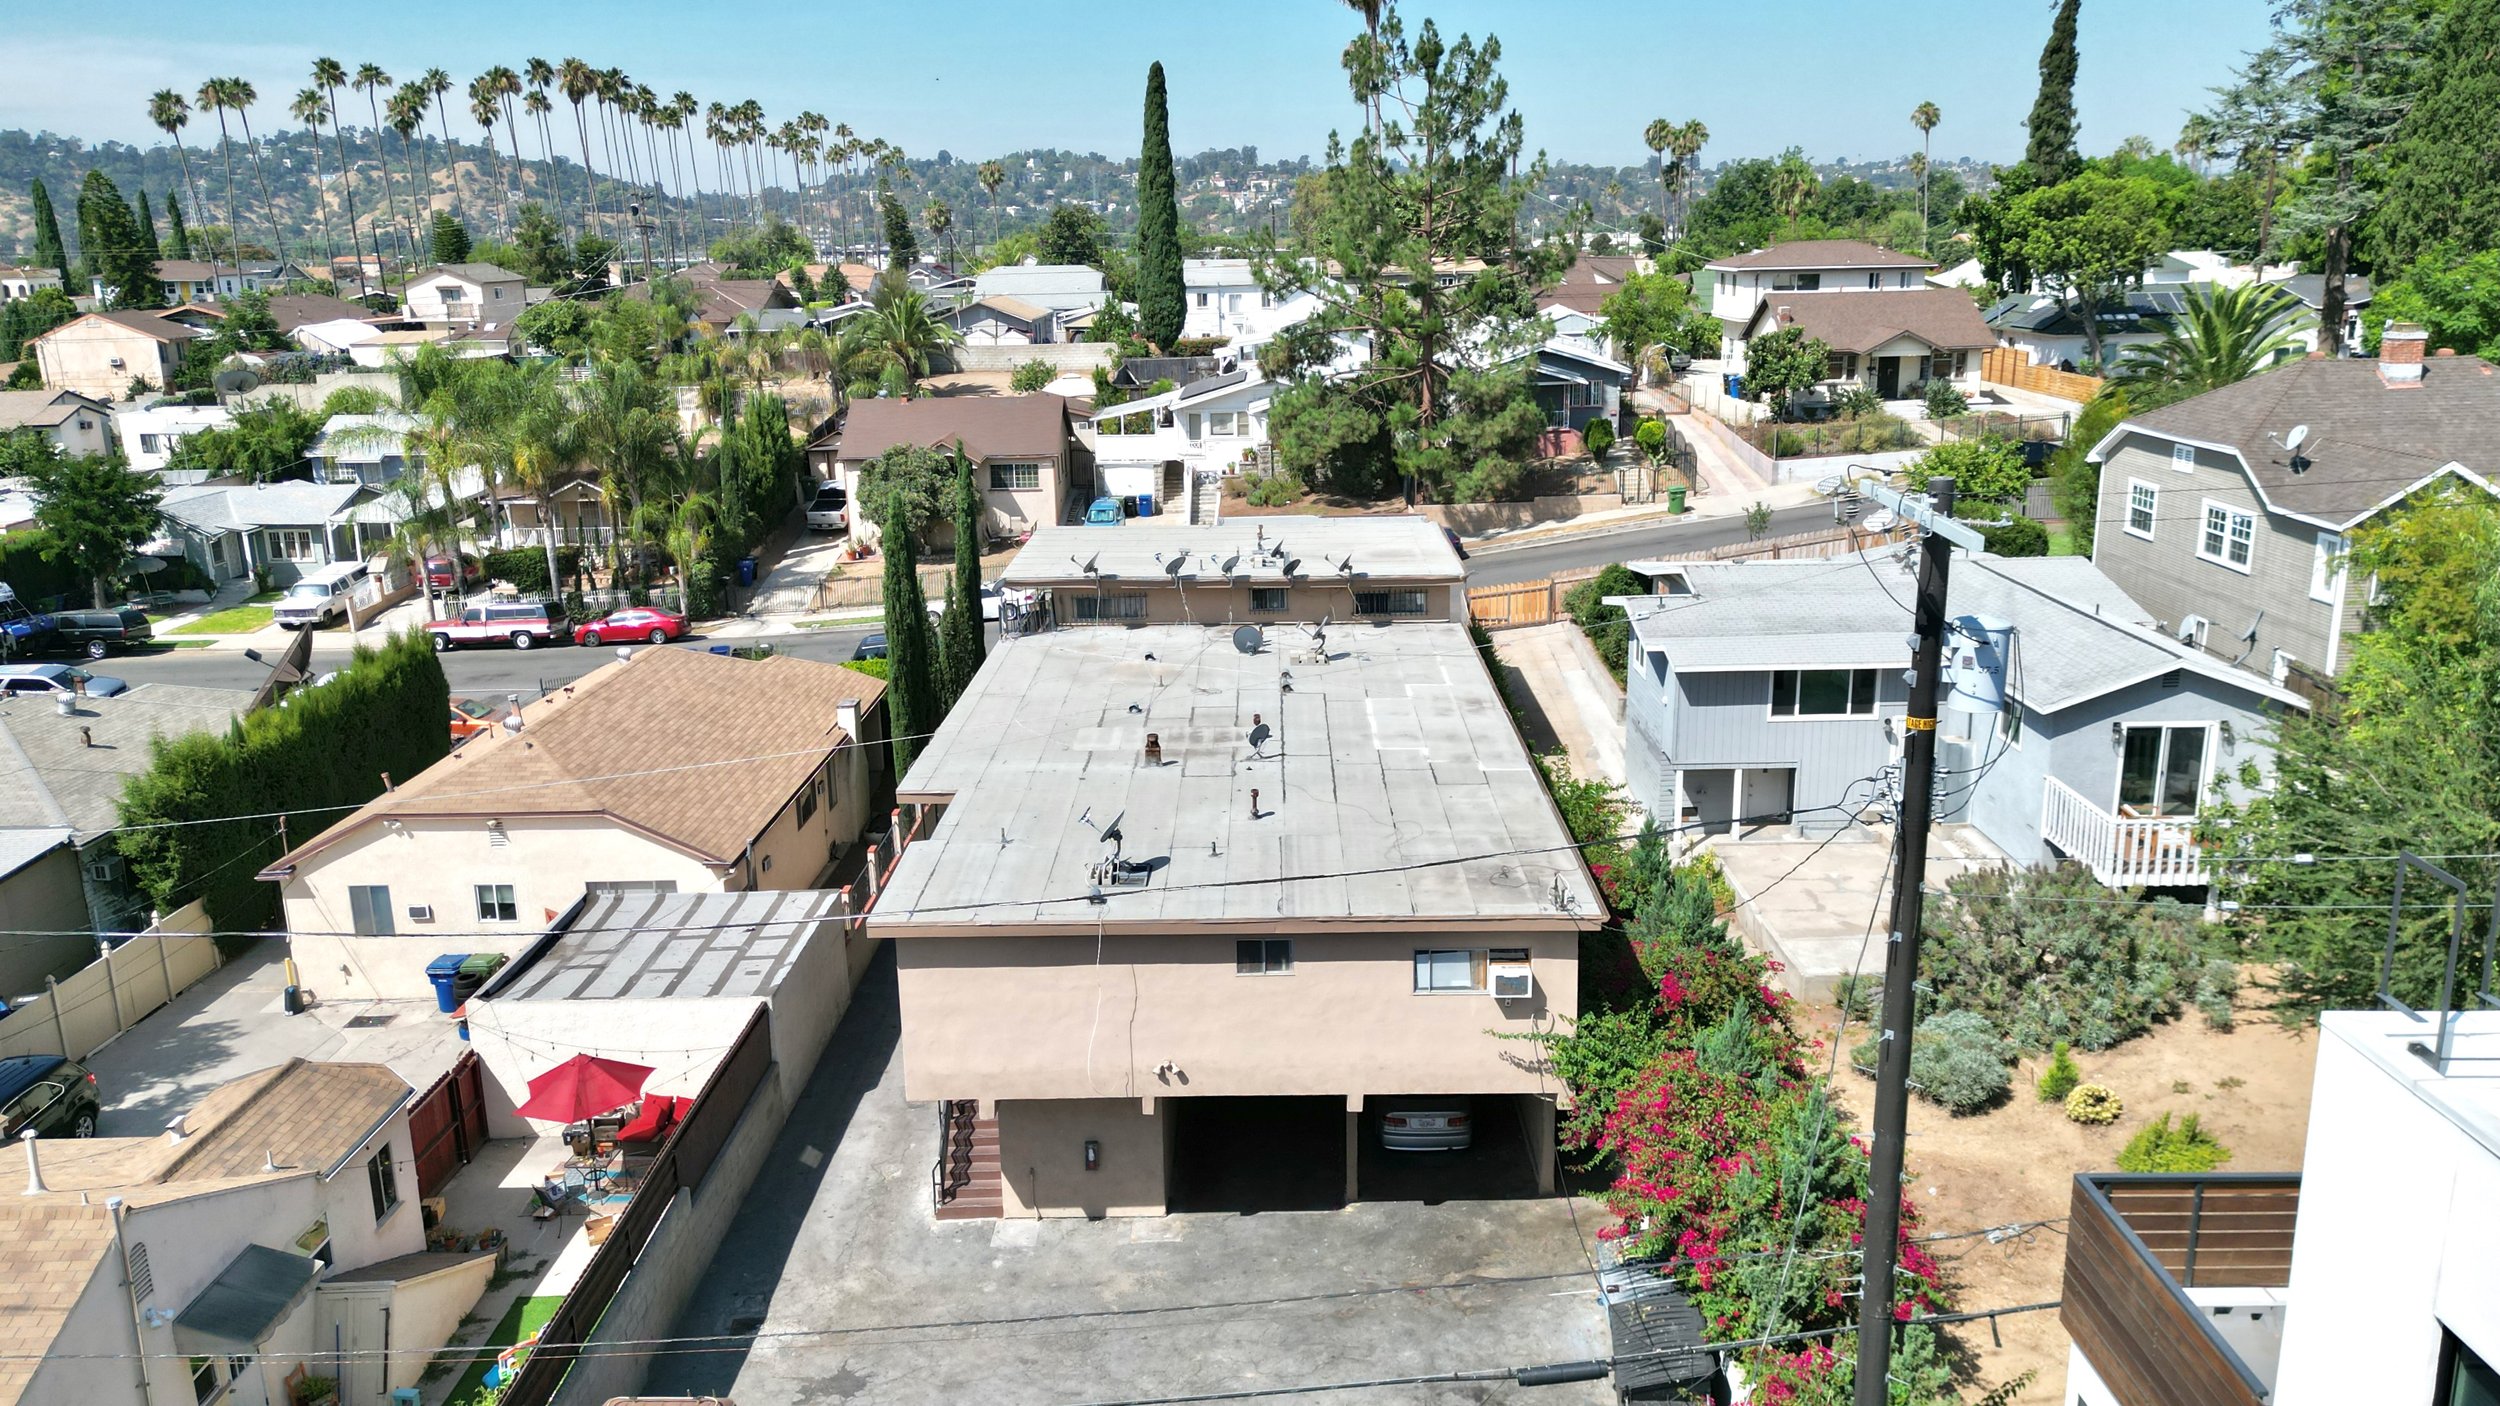 Elevated view of a neighborhood with houses, palm trees, and hills in the background.